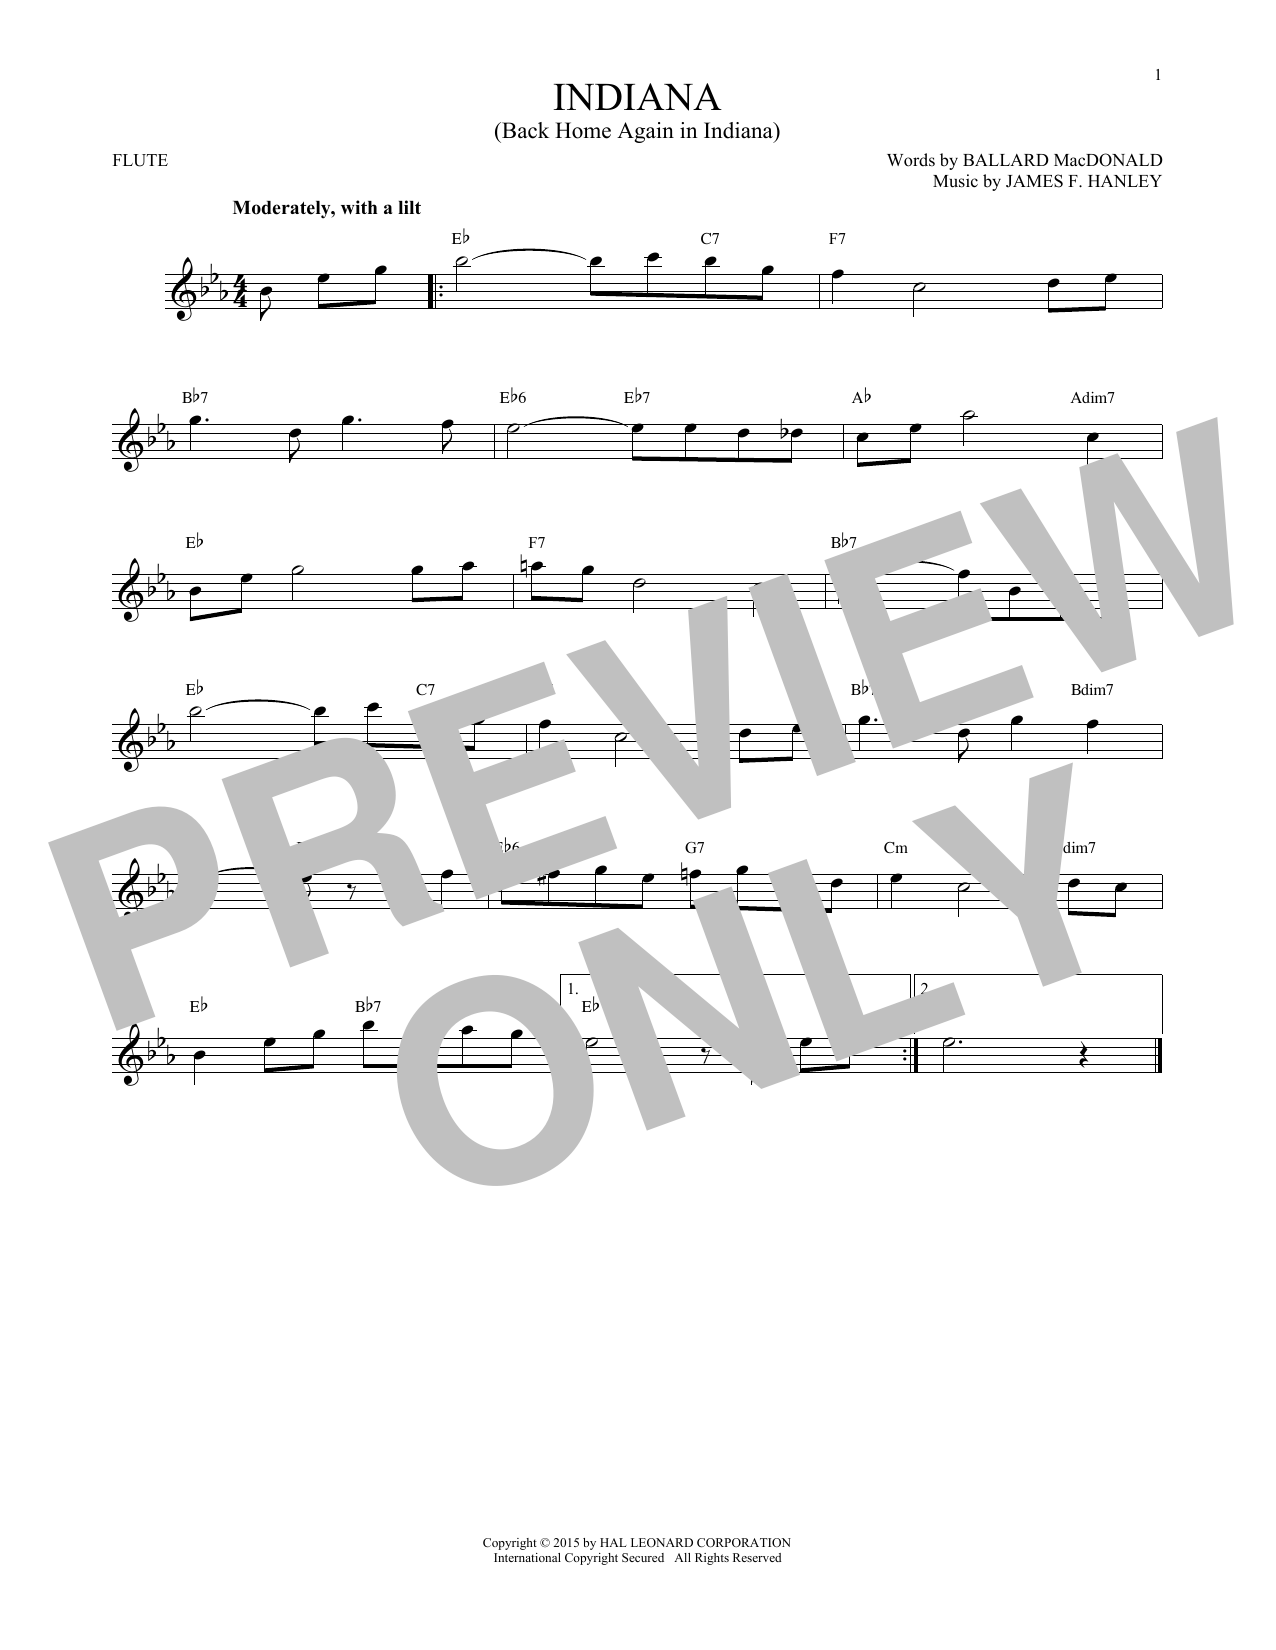 James F. Hanley Indiana (Back Home Again In Indiana) sheet music notes and chords. Download Printable PDF.